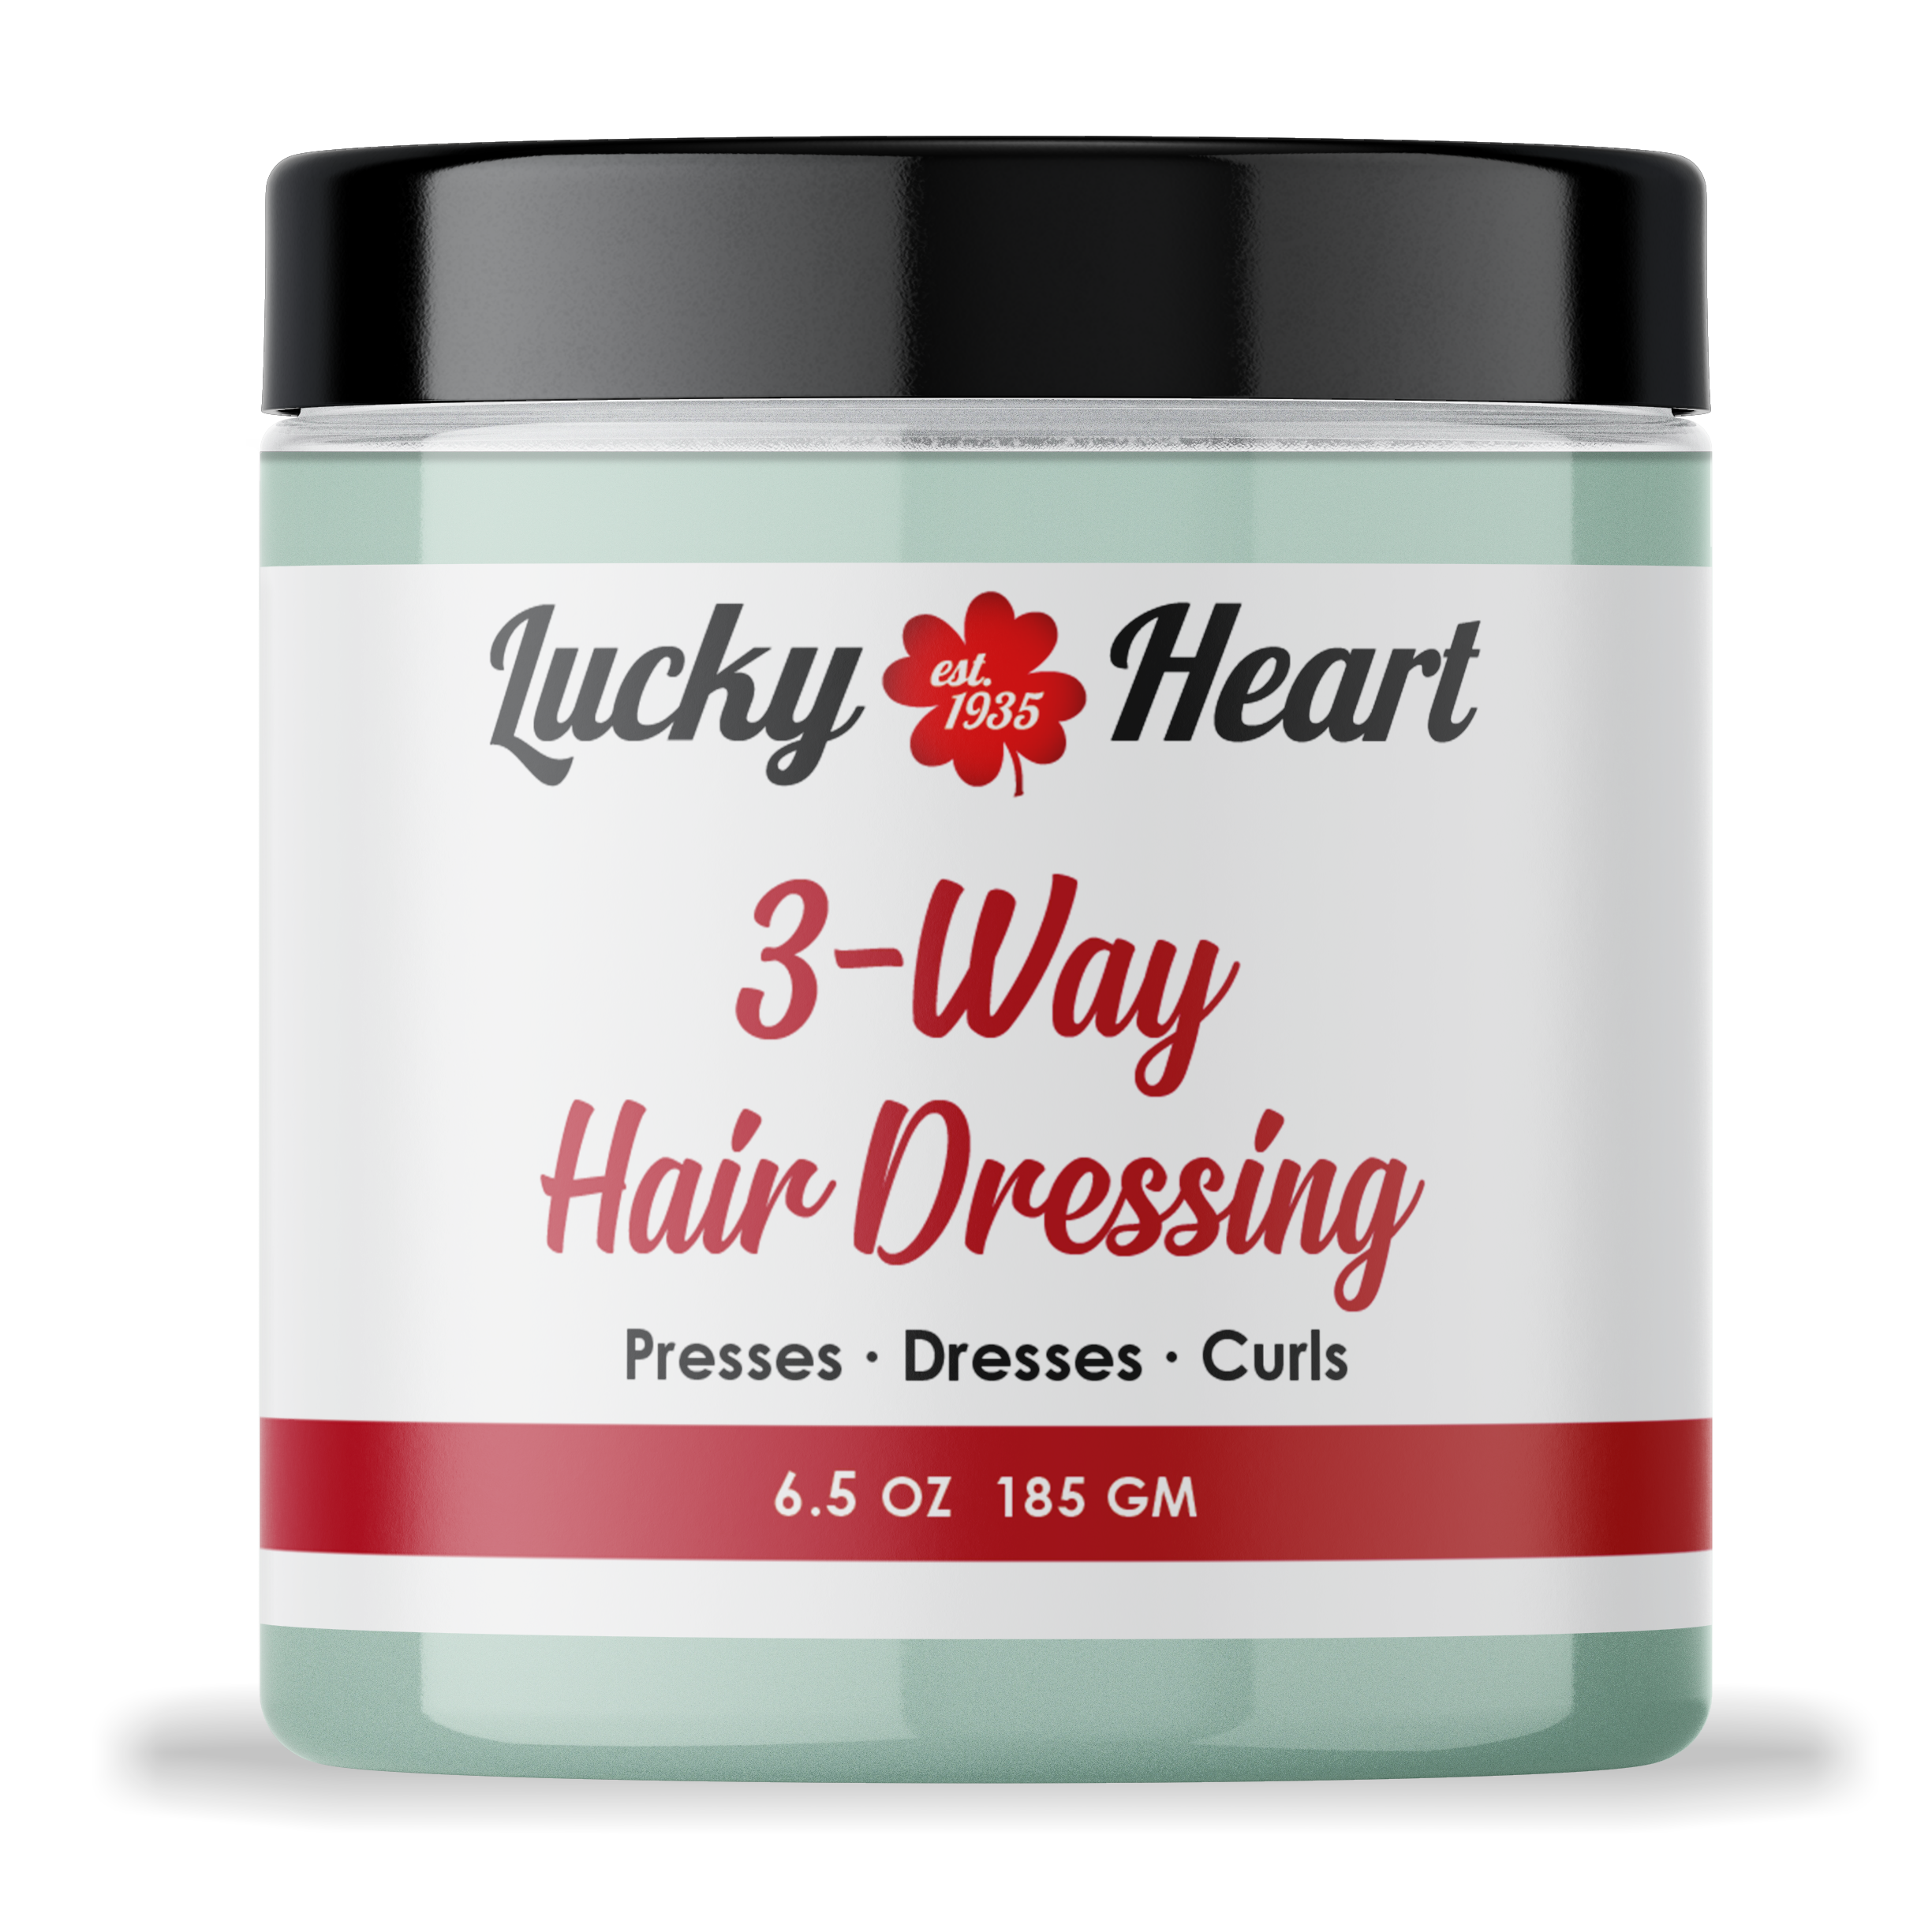 3-Way Hair Dressing by Lucky Heart Cosmetics